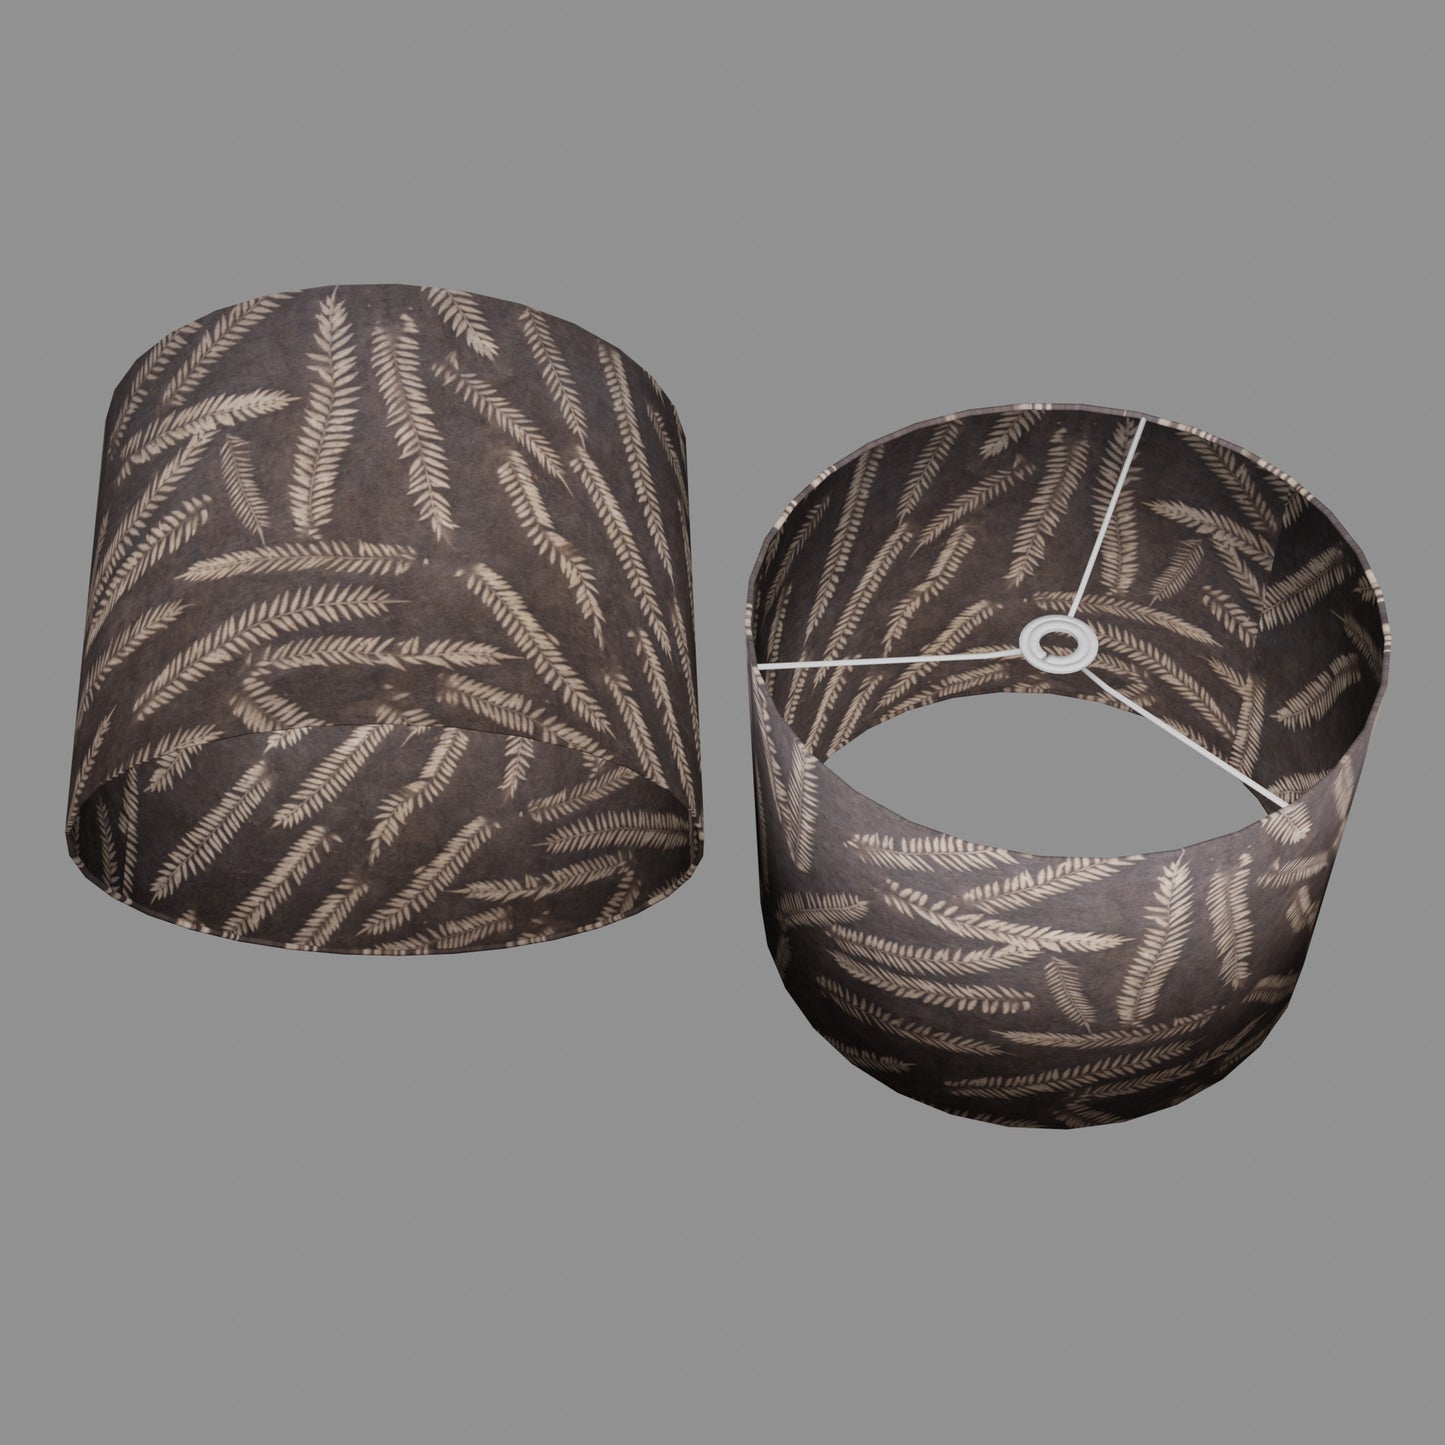 Drum Lamp Shade - P26 - Resistance Dyed Brown Fern, 40cm(d) x 30cm(h)